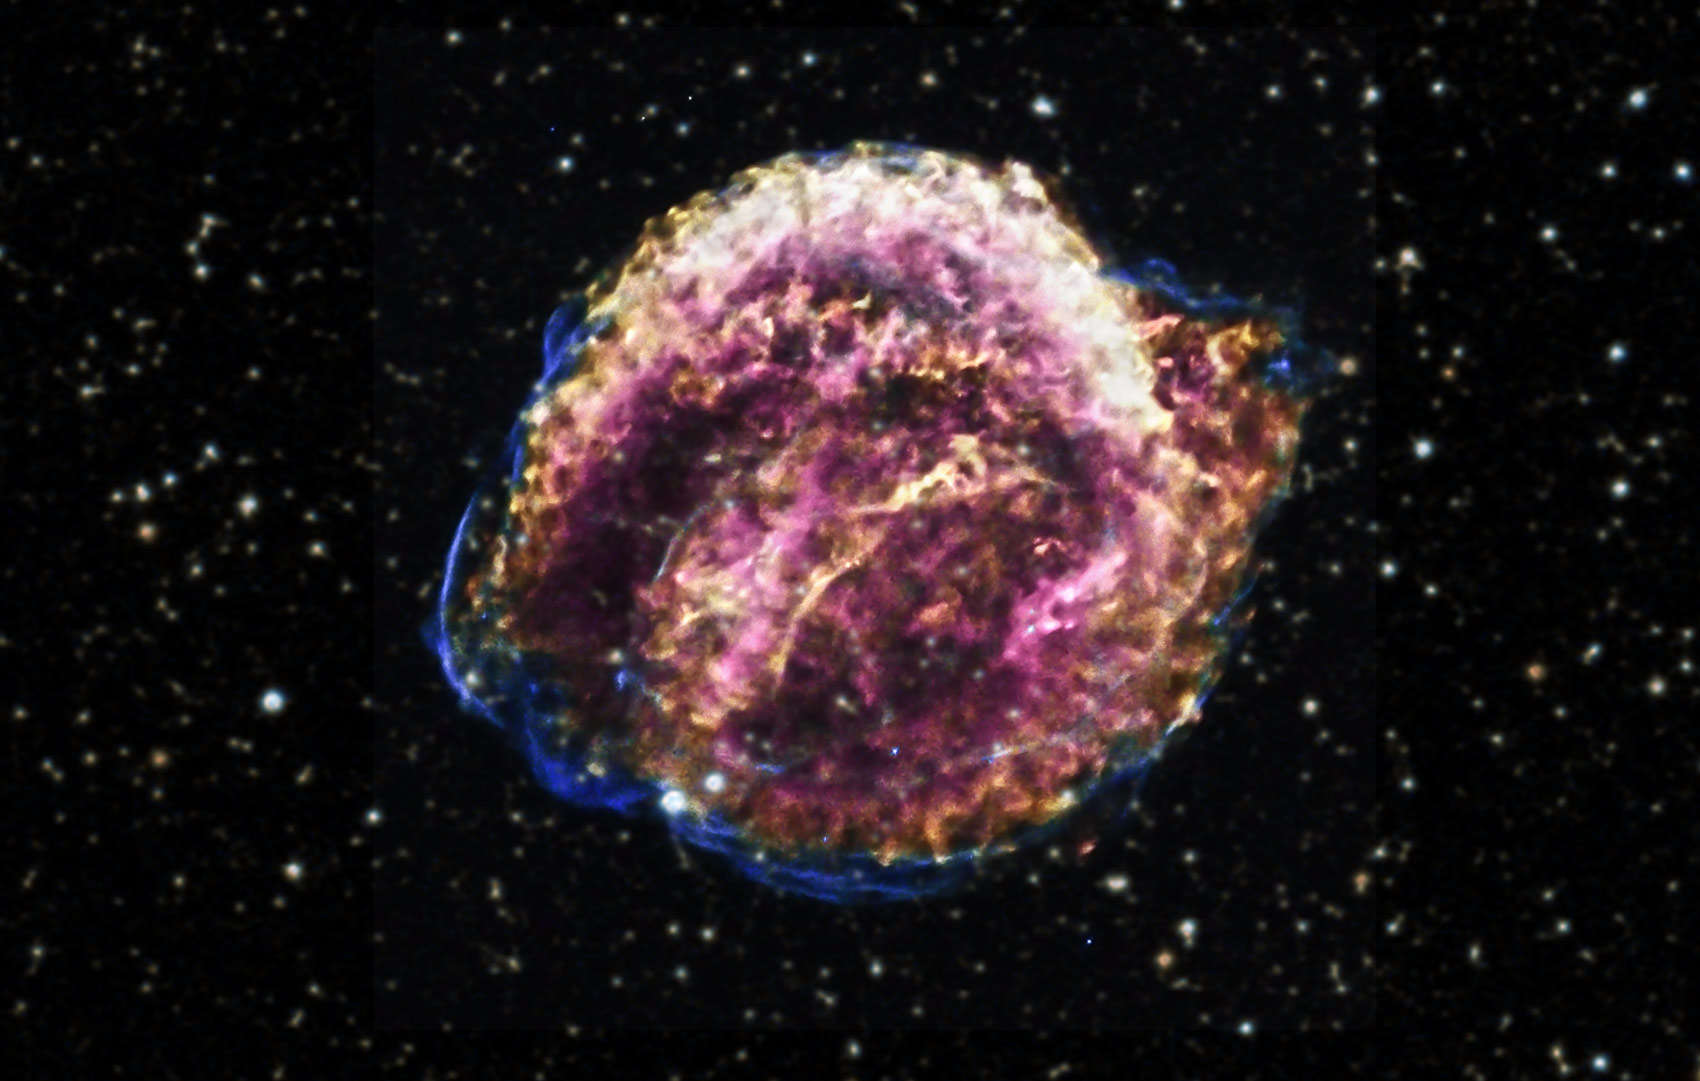 The expanding debris from Kepler's Supernova in 1604, a Type Ia explosion of a white dwarf in the Milky Way galaxy. Credit: X-ray: NASA/CXC/SAO/D.Patnaude, Optical: DSS